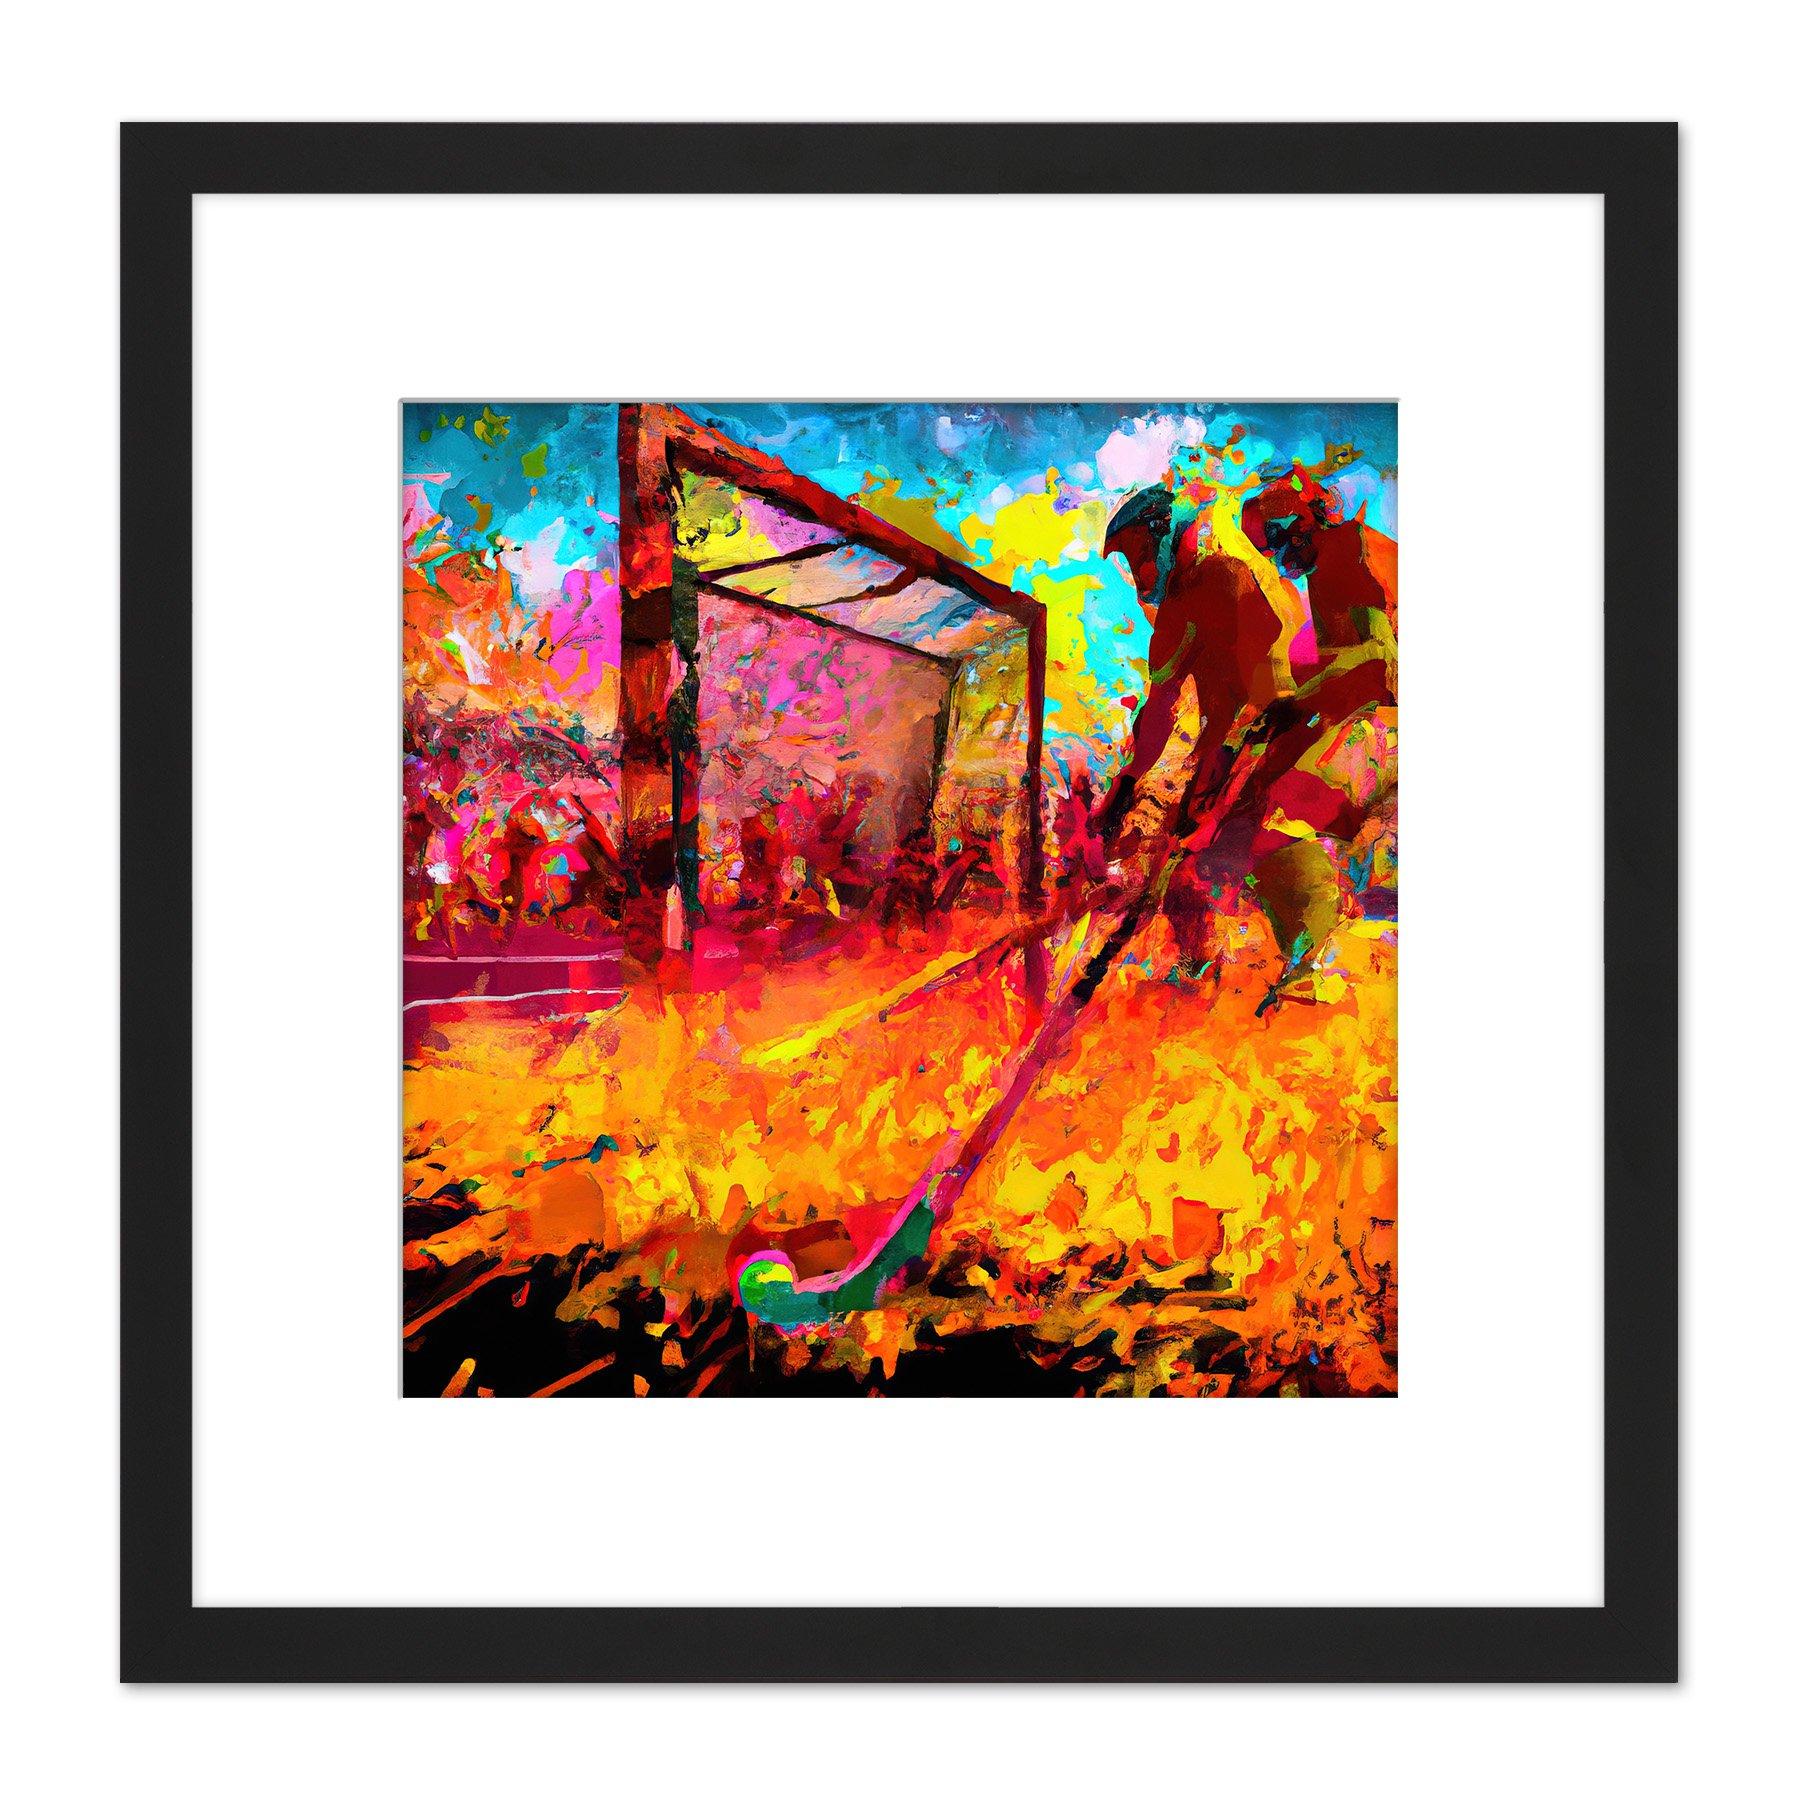 Field Hockey Game Abstract Vibrant Colourful Oil Painting Square Wooden Framed Wall Art Print Picture 8X8 Inch